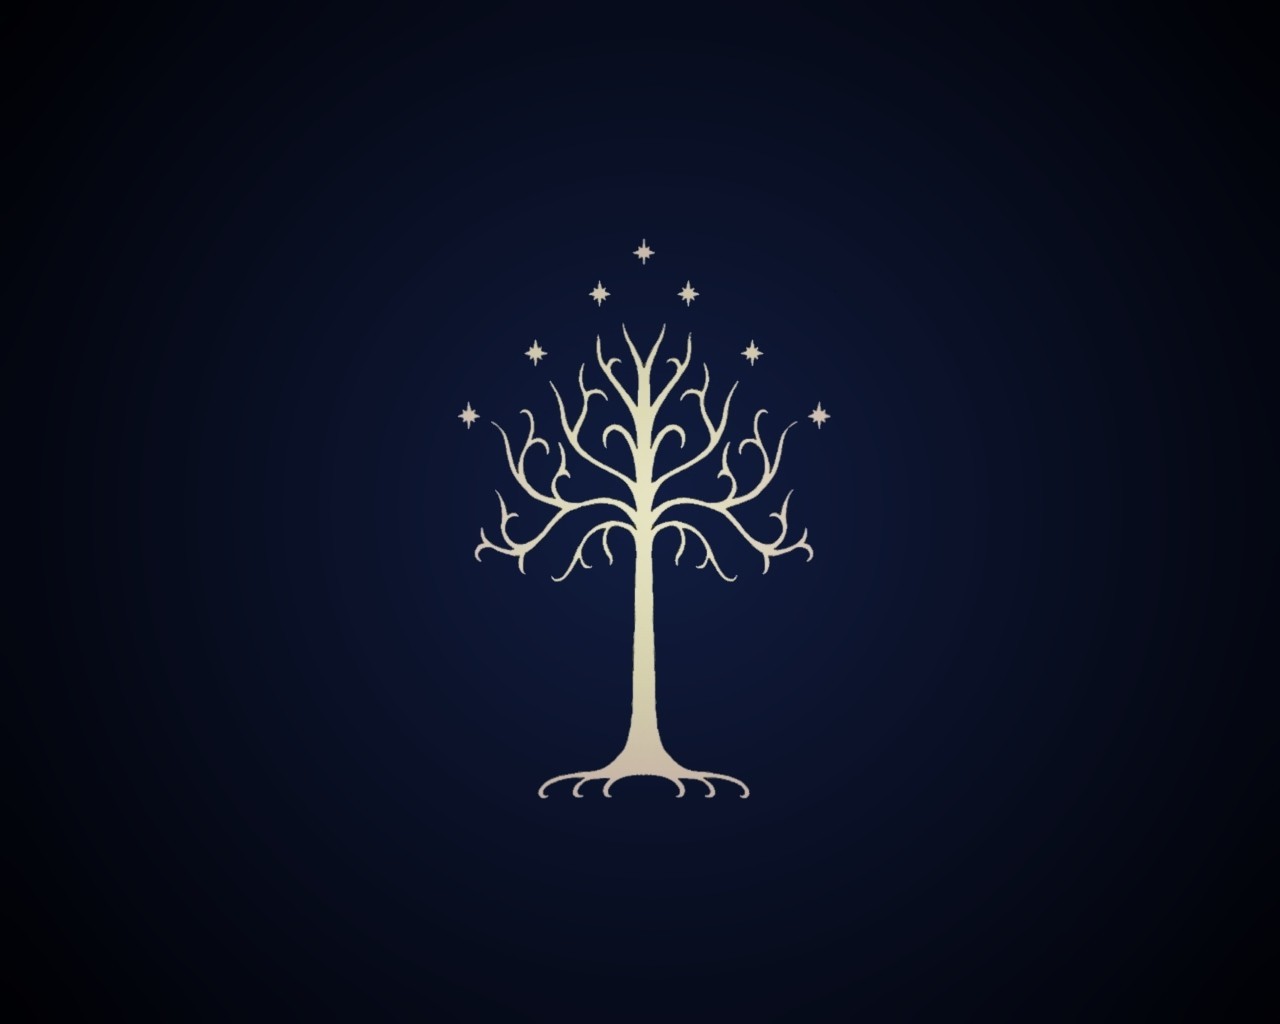 sigils, The Lord Of The Rings, Trees, Blue Background, Symbols, Gondor Wallpaper